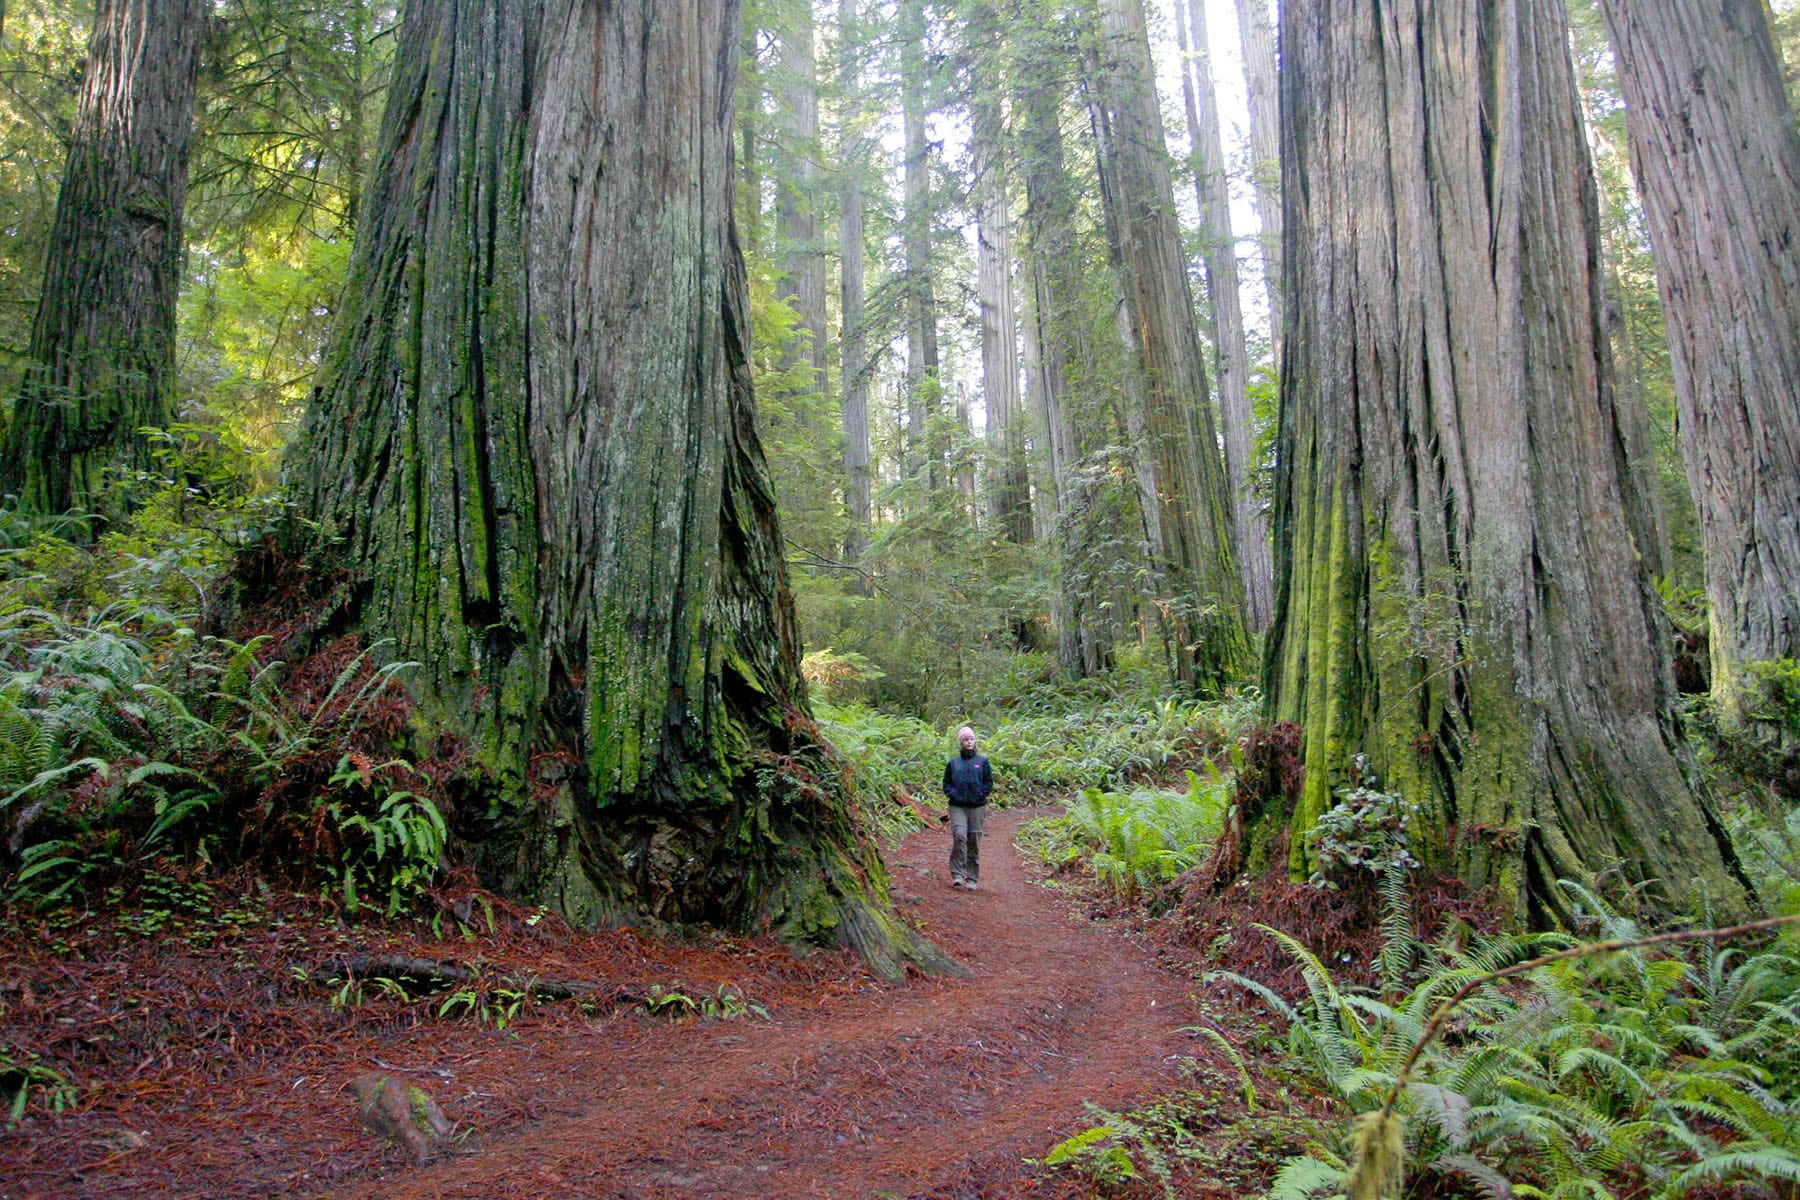 Boy Scout Tree Trail is one of the most unforgettable hiking trails in California